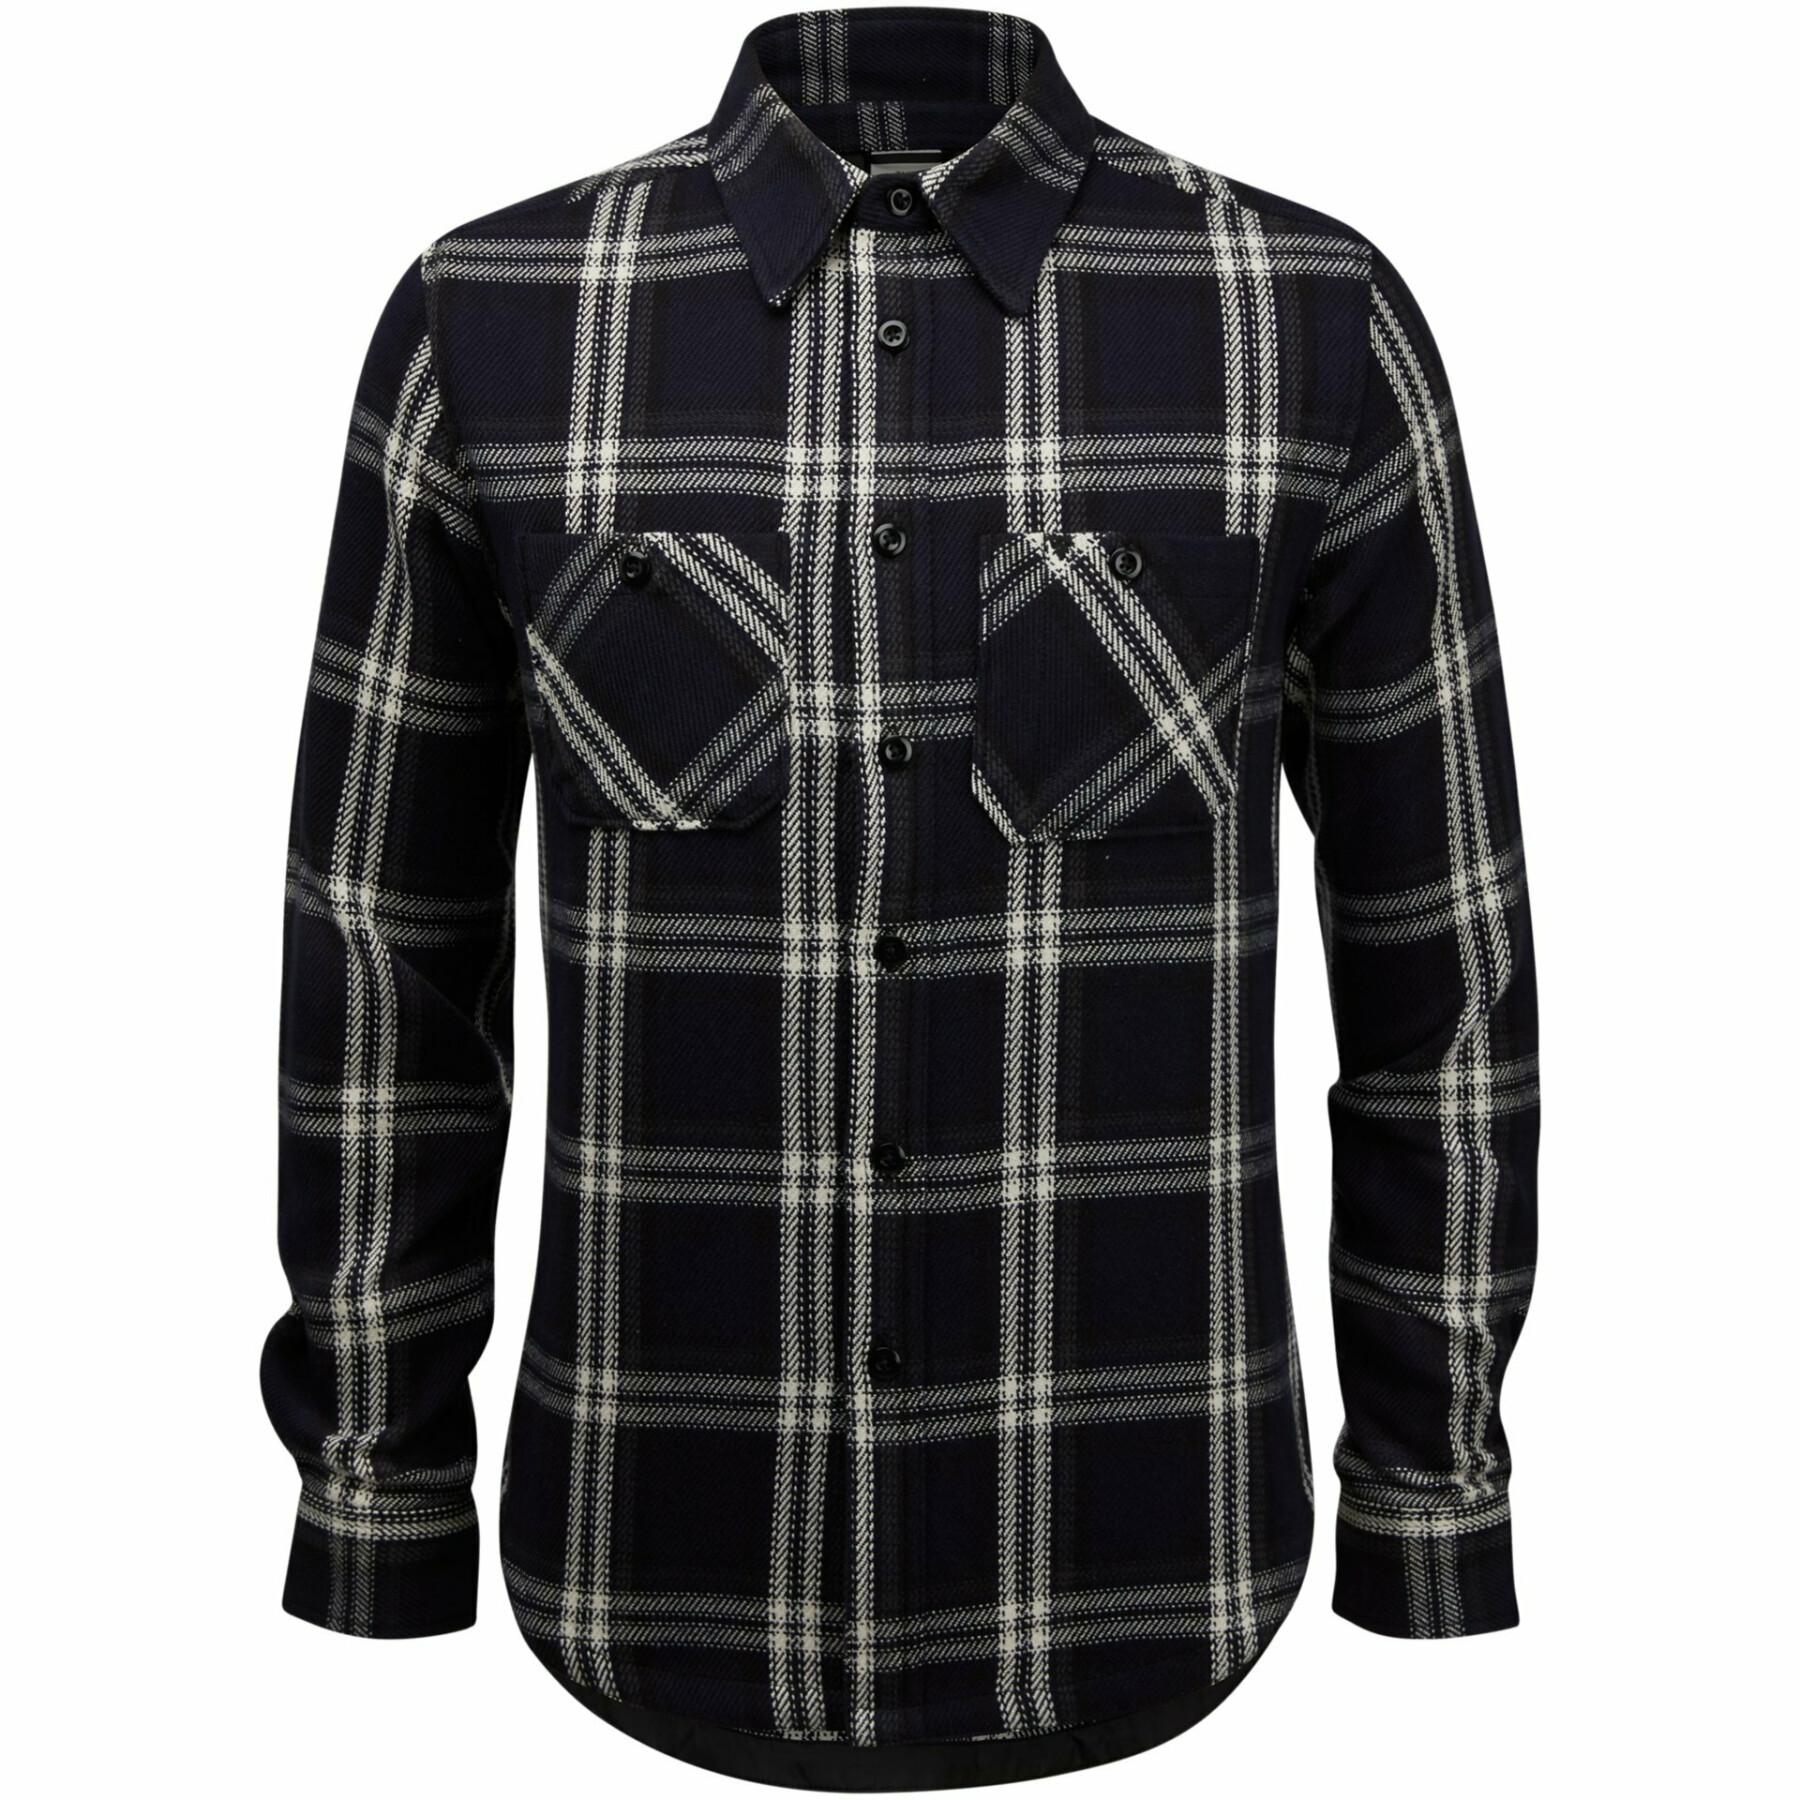 Chemise The North Face Valley Twill Flannel